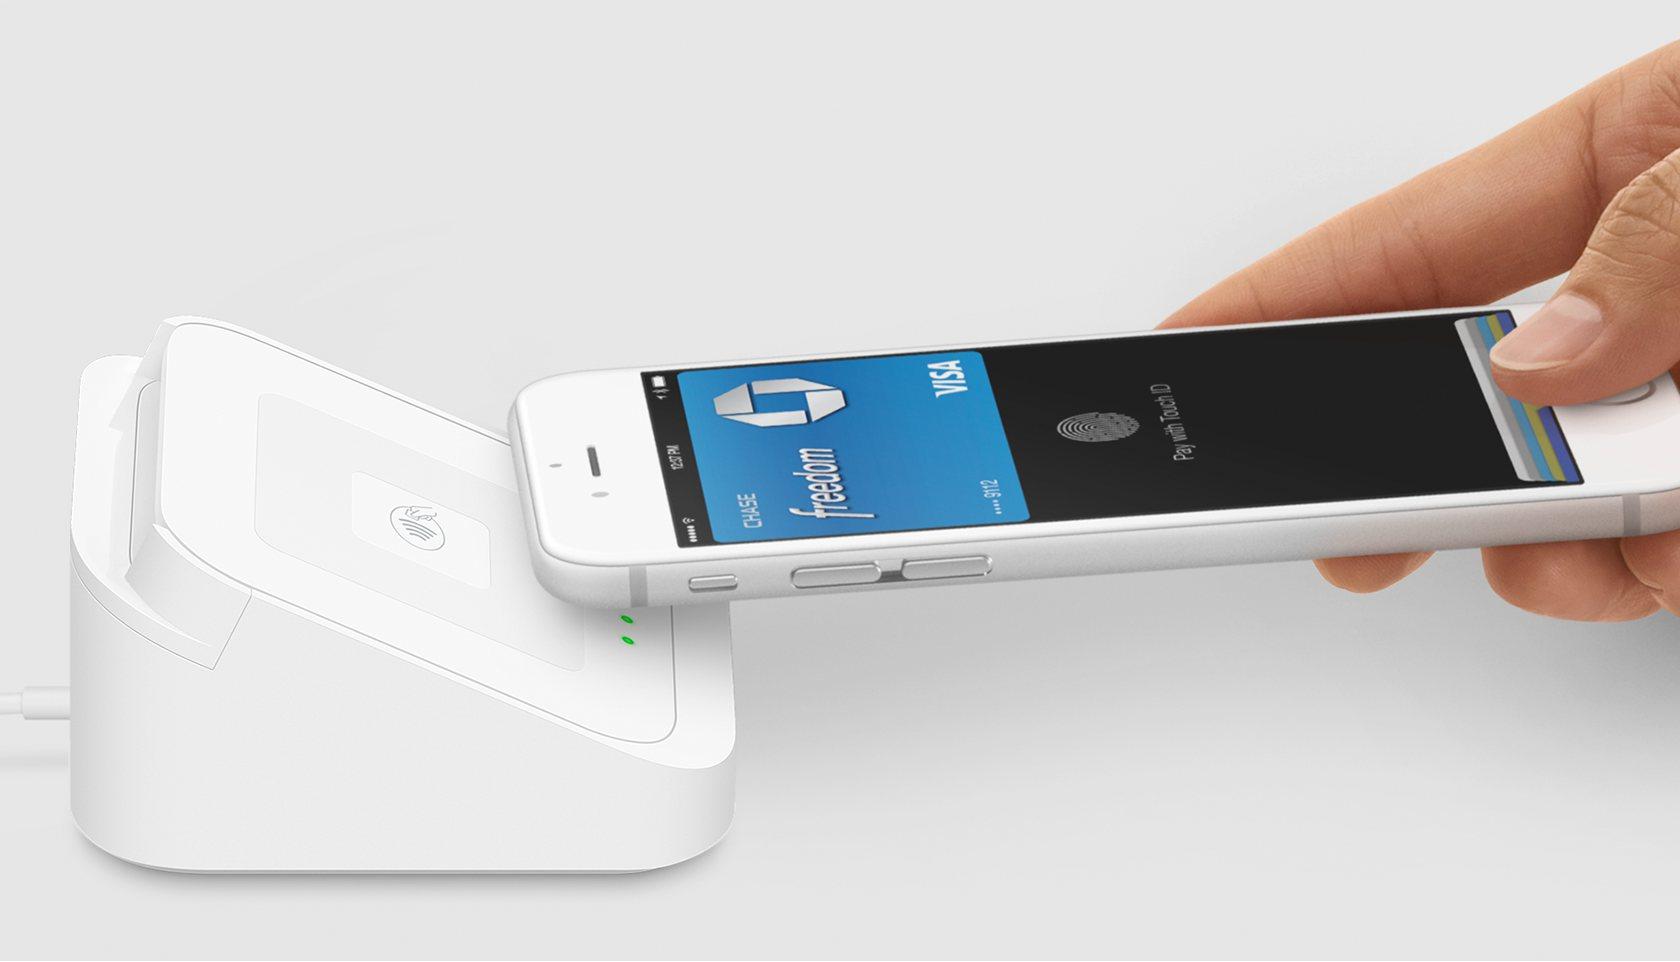 Square Apple Pay Logo - NFC Guide: All You Need to Know About Near Field Communication